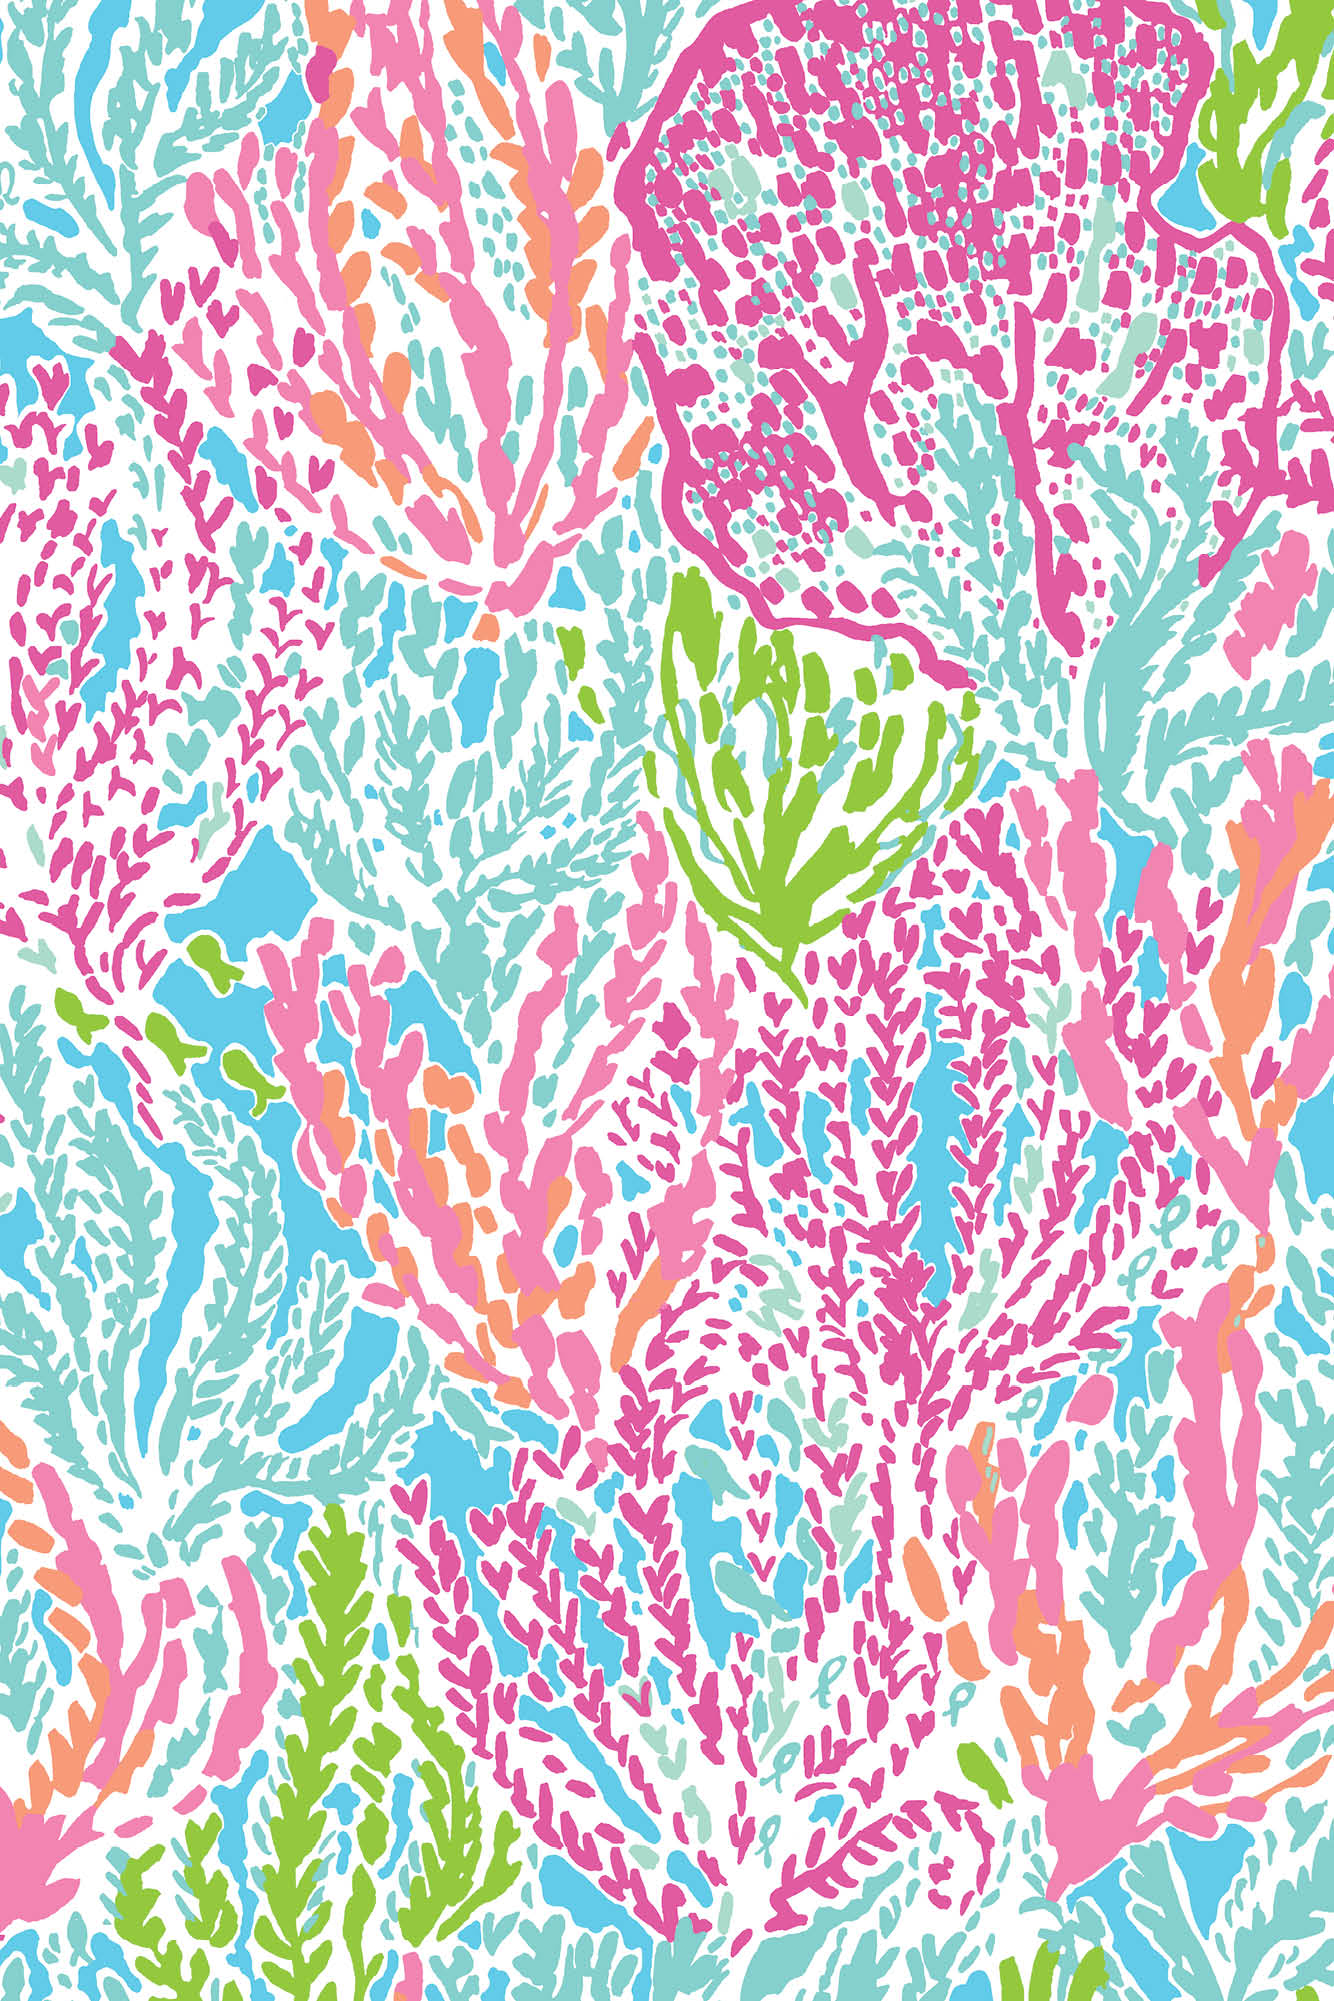 Lilly Pulitzer Wallpaper, Amazing Lilly Pulitzer Images - Lilly Pulitzer Patterns Lets Cha Cha - HD Wallpaper 